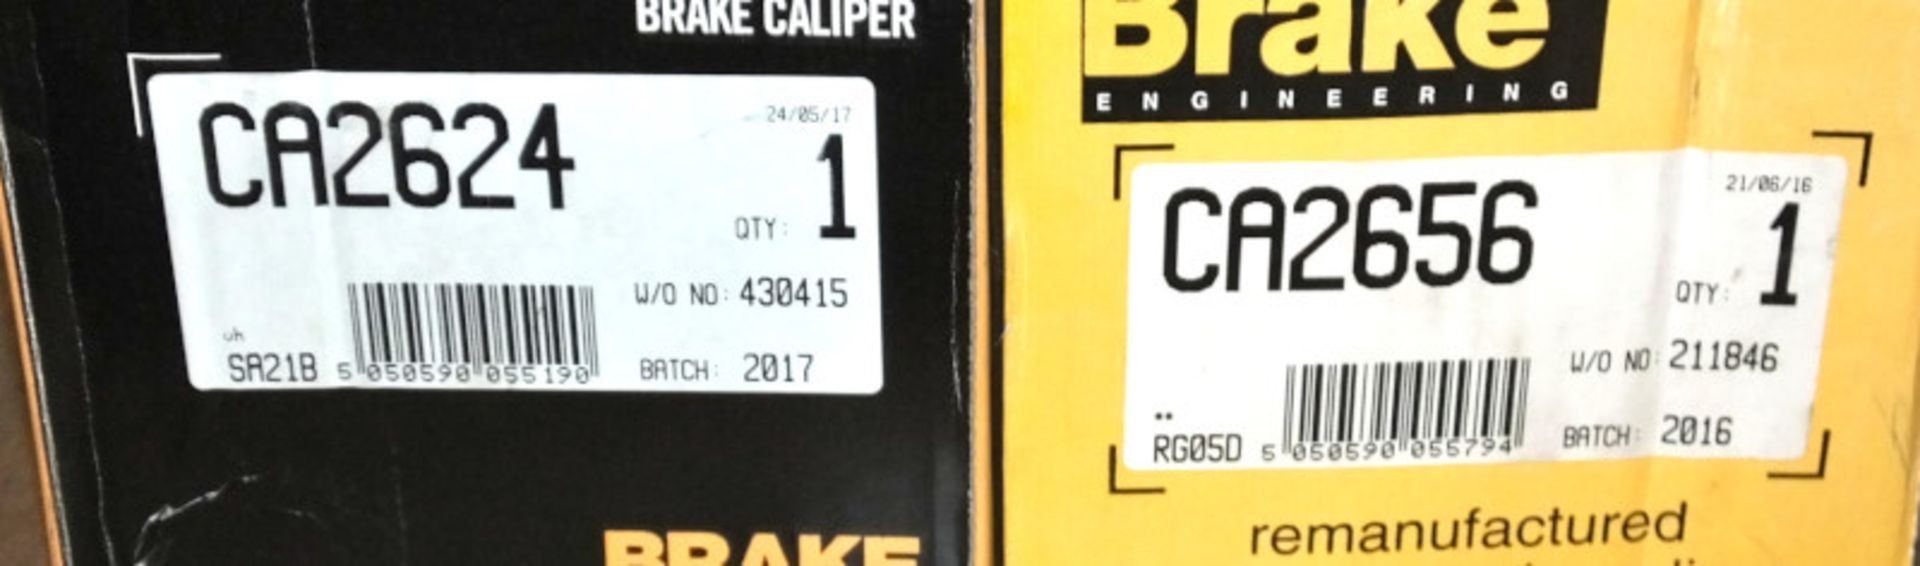 4x Brake Engineering Brake Calipers - Please check pictures for model numbers - Image 3 of 3